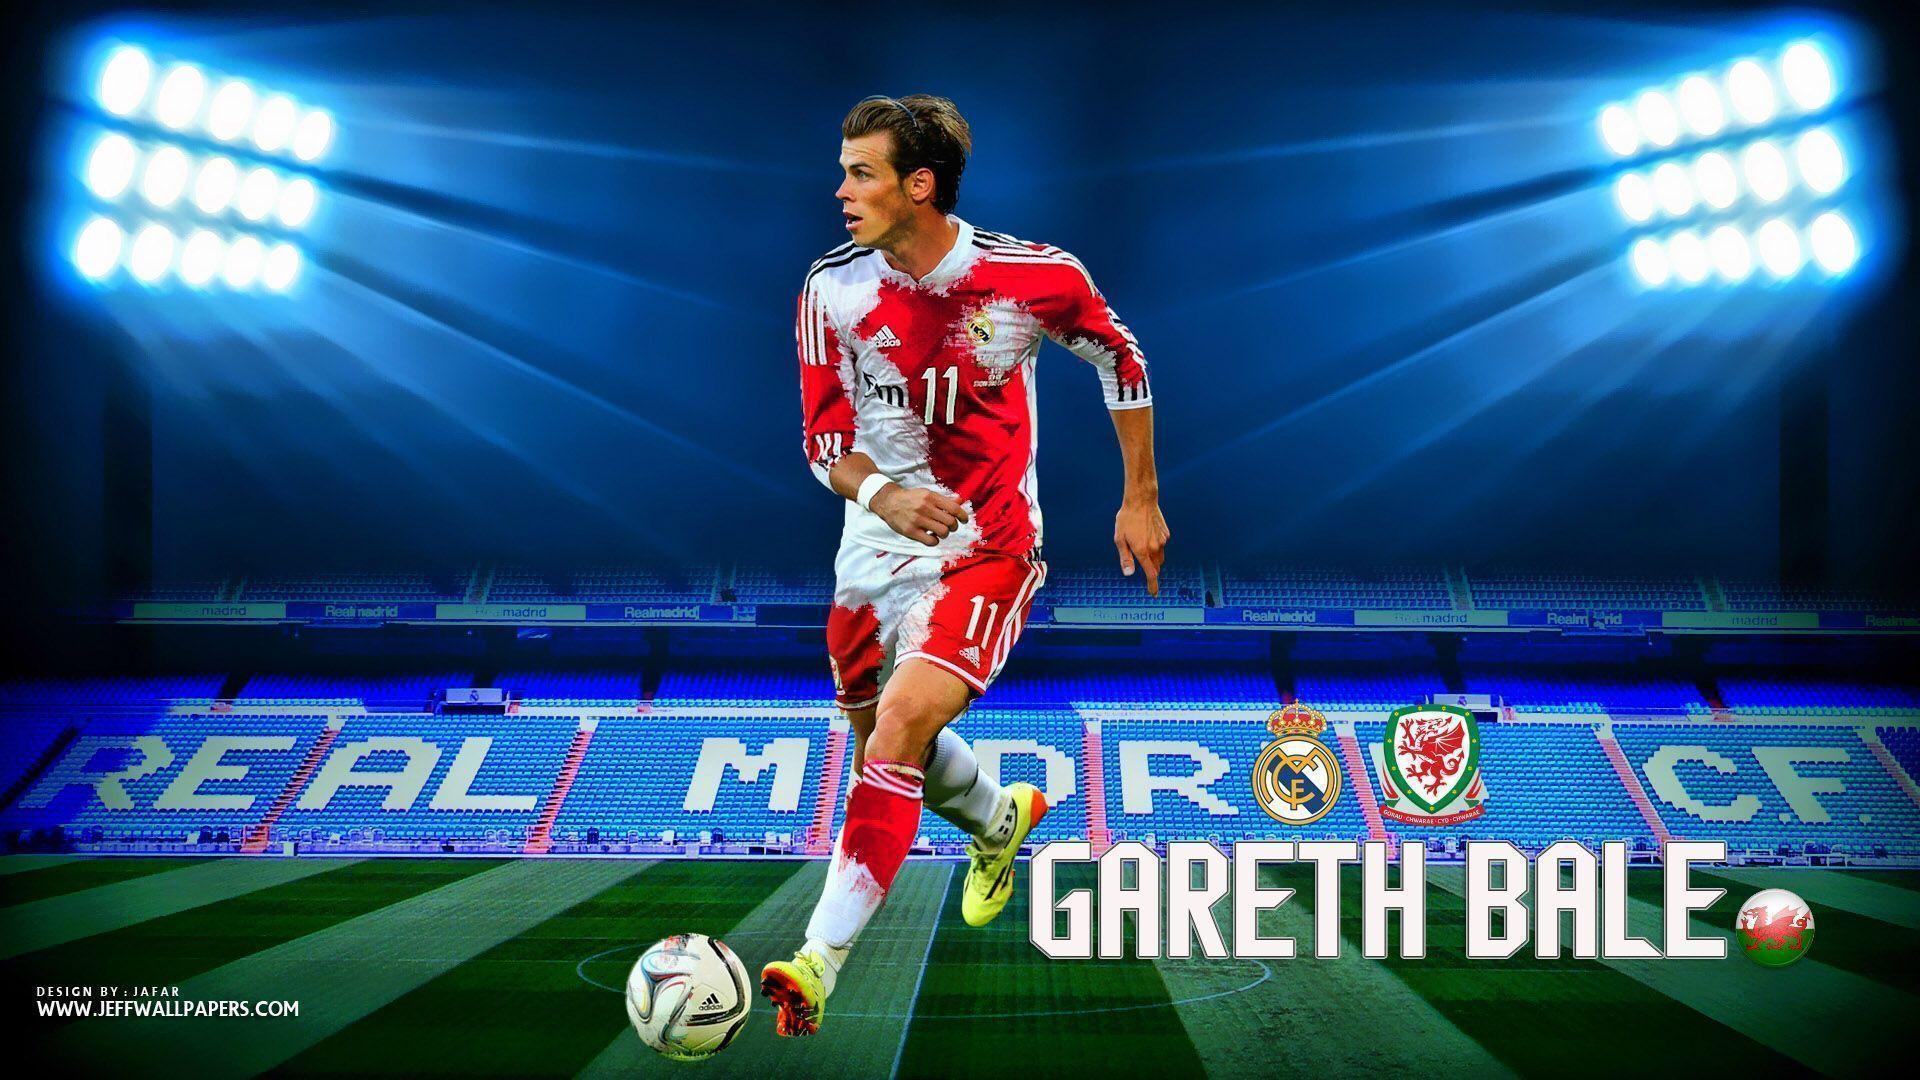 Gareth Bale 2015 Real Madrid & Wales Wallpaper Wide or HD. Male